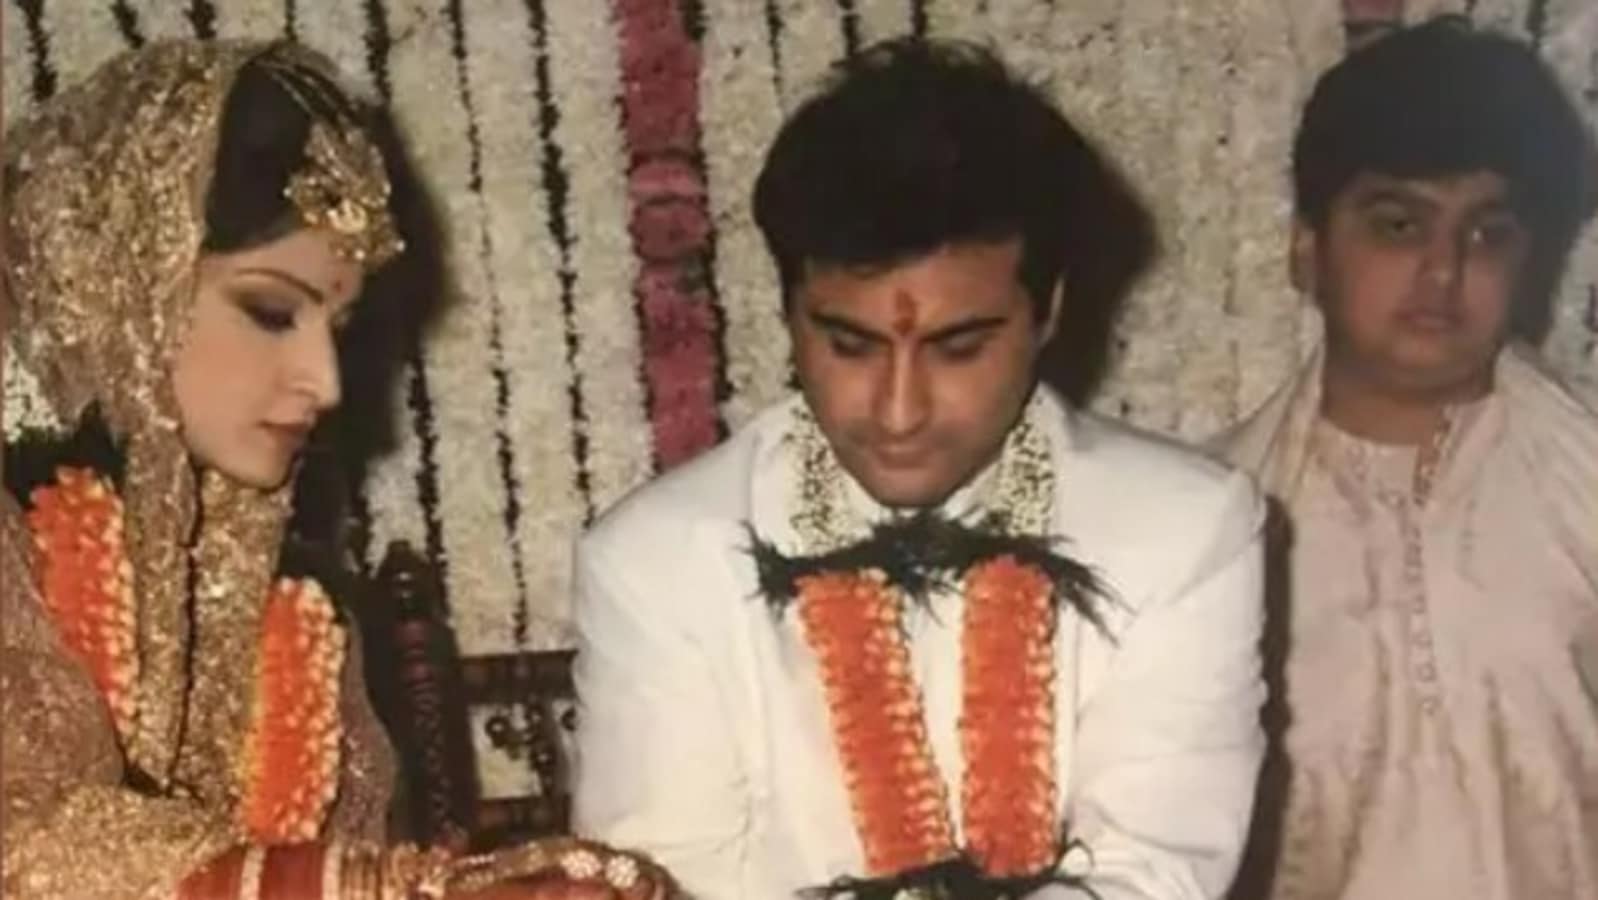 Arjun Kapoor roasts Sanjay Kapoor over old pic from his wedding with Maheep: ‘Was in disbelief you were getting married’